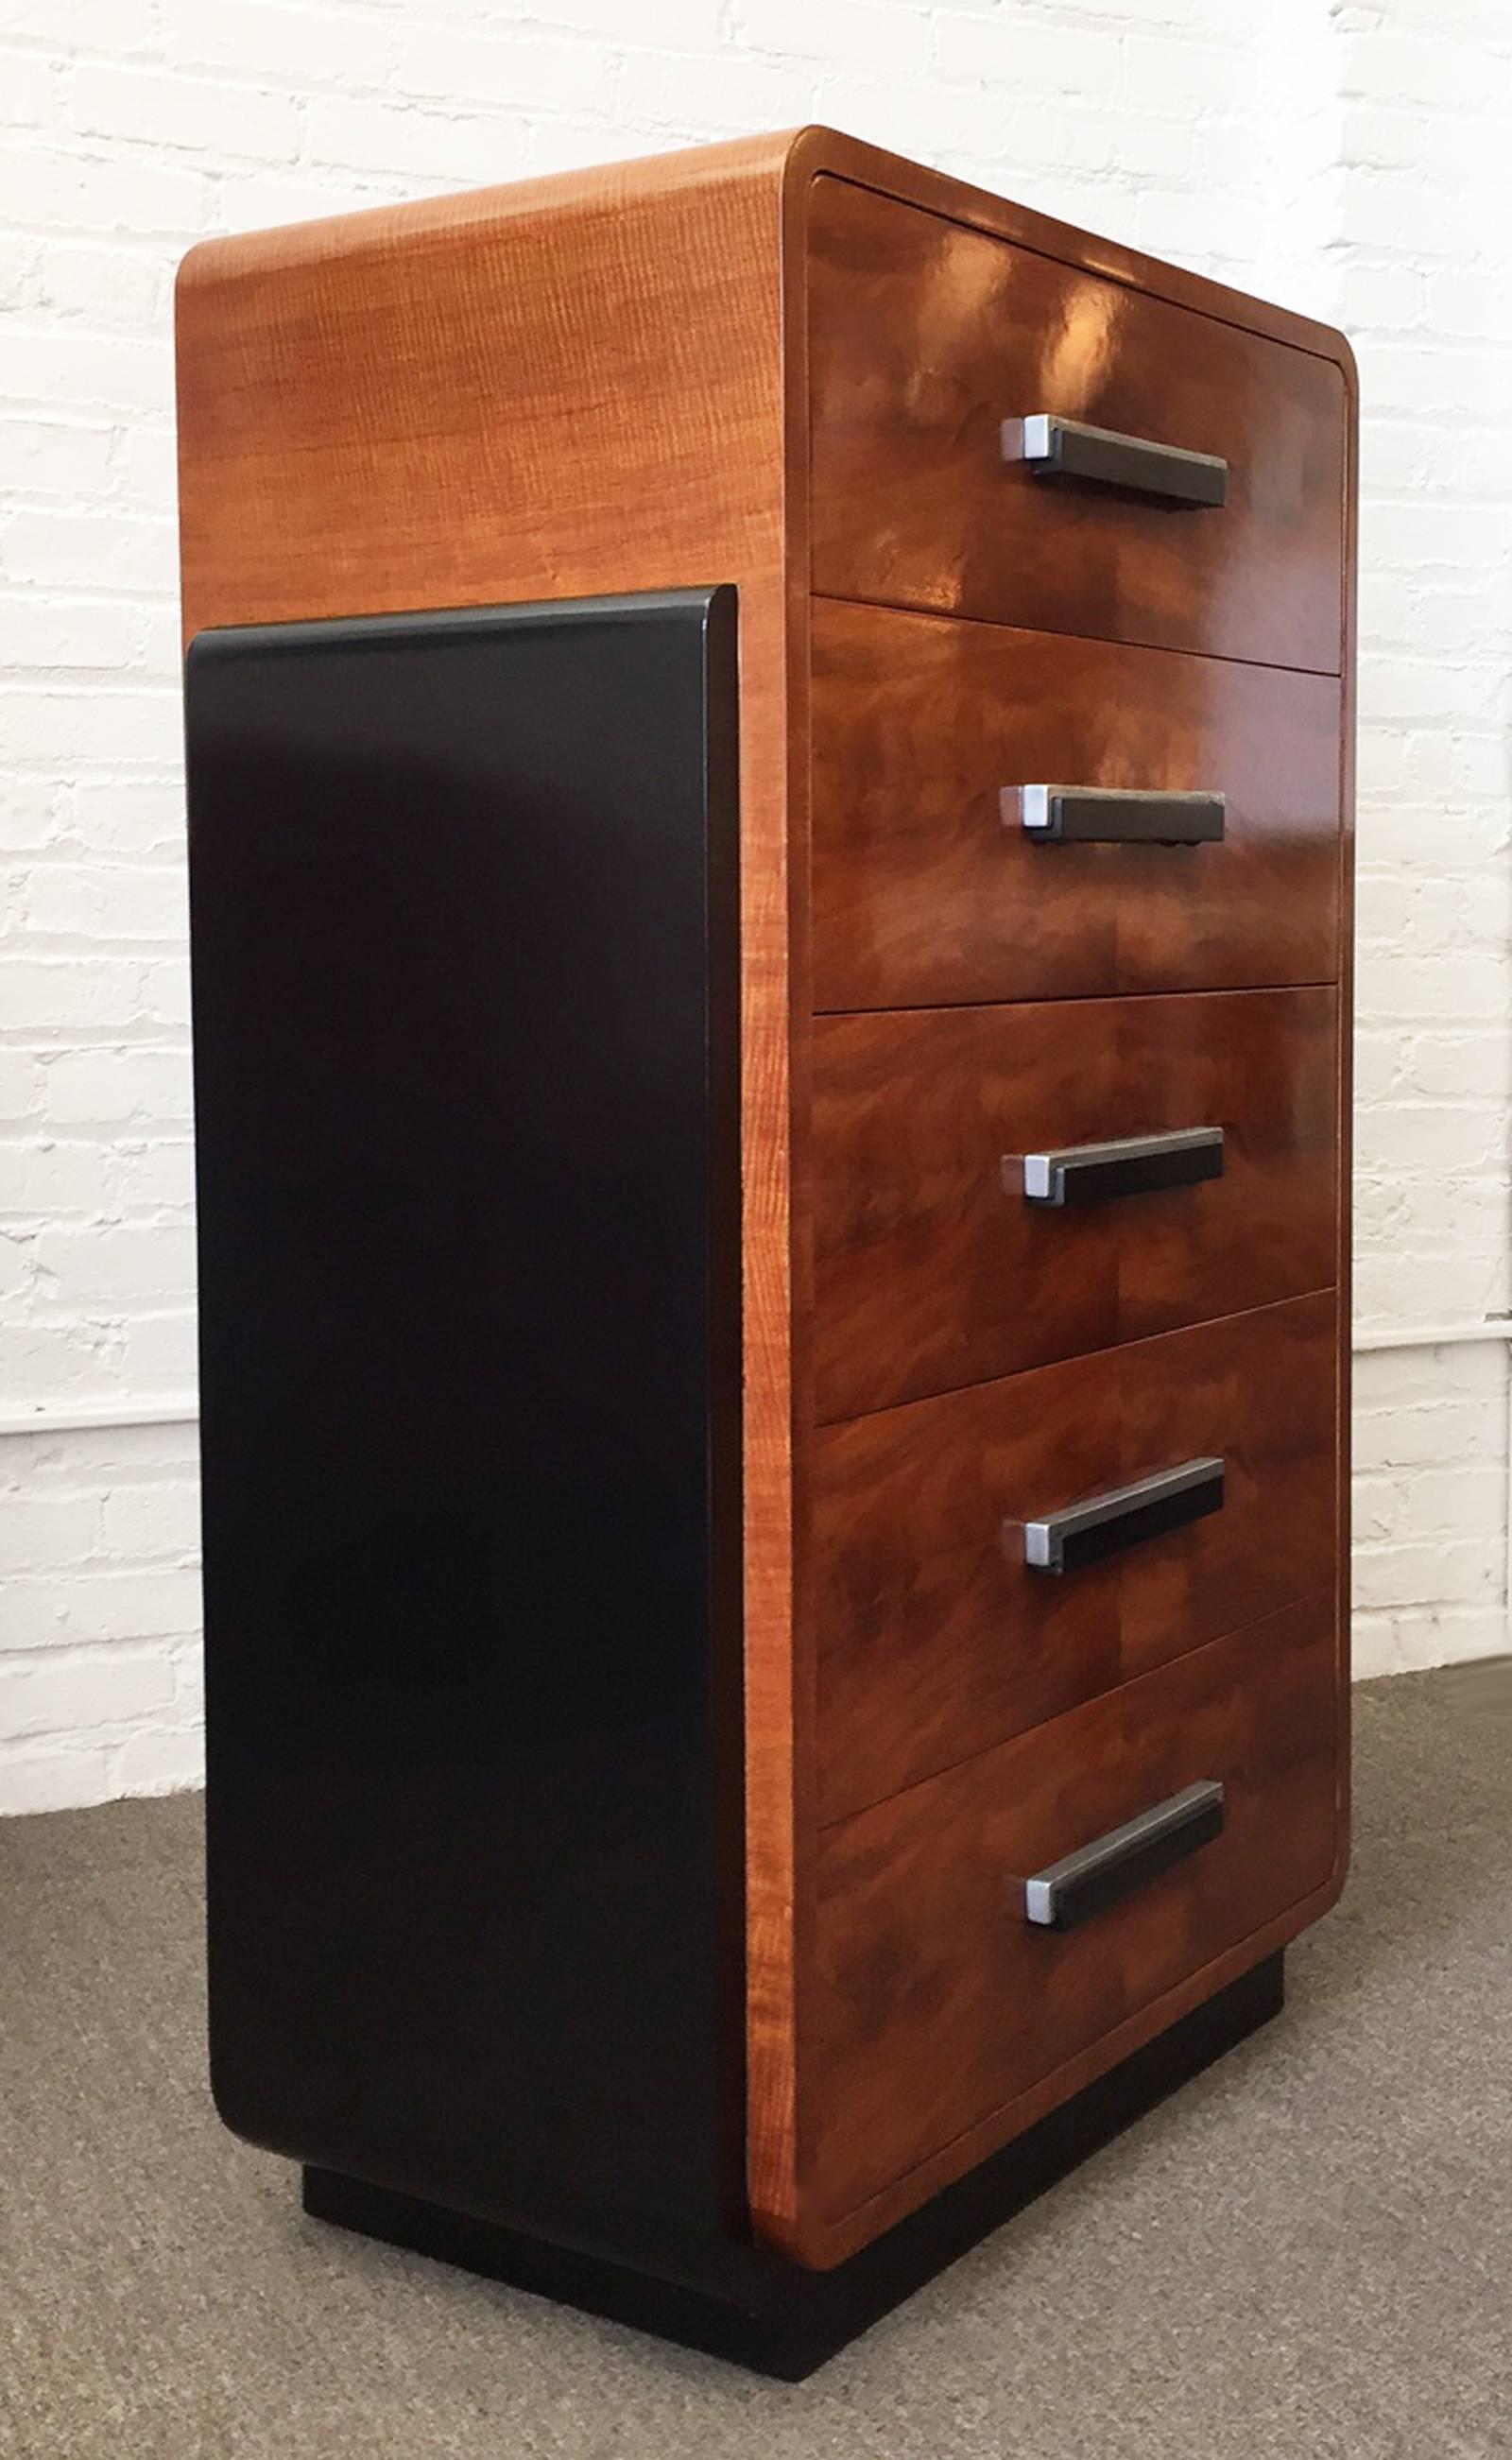 Tall dresser designed by Donald Deskey for Widdicomb Furniture, 1930s streamline design. Features bookmatched flame walnut drawers with signature Deskey metal and wood handles. The finish has been expertly restored. Price is for the tall dresser